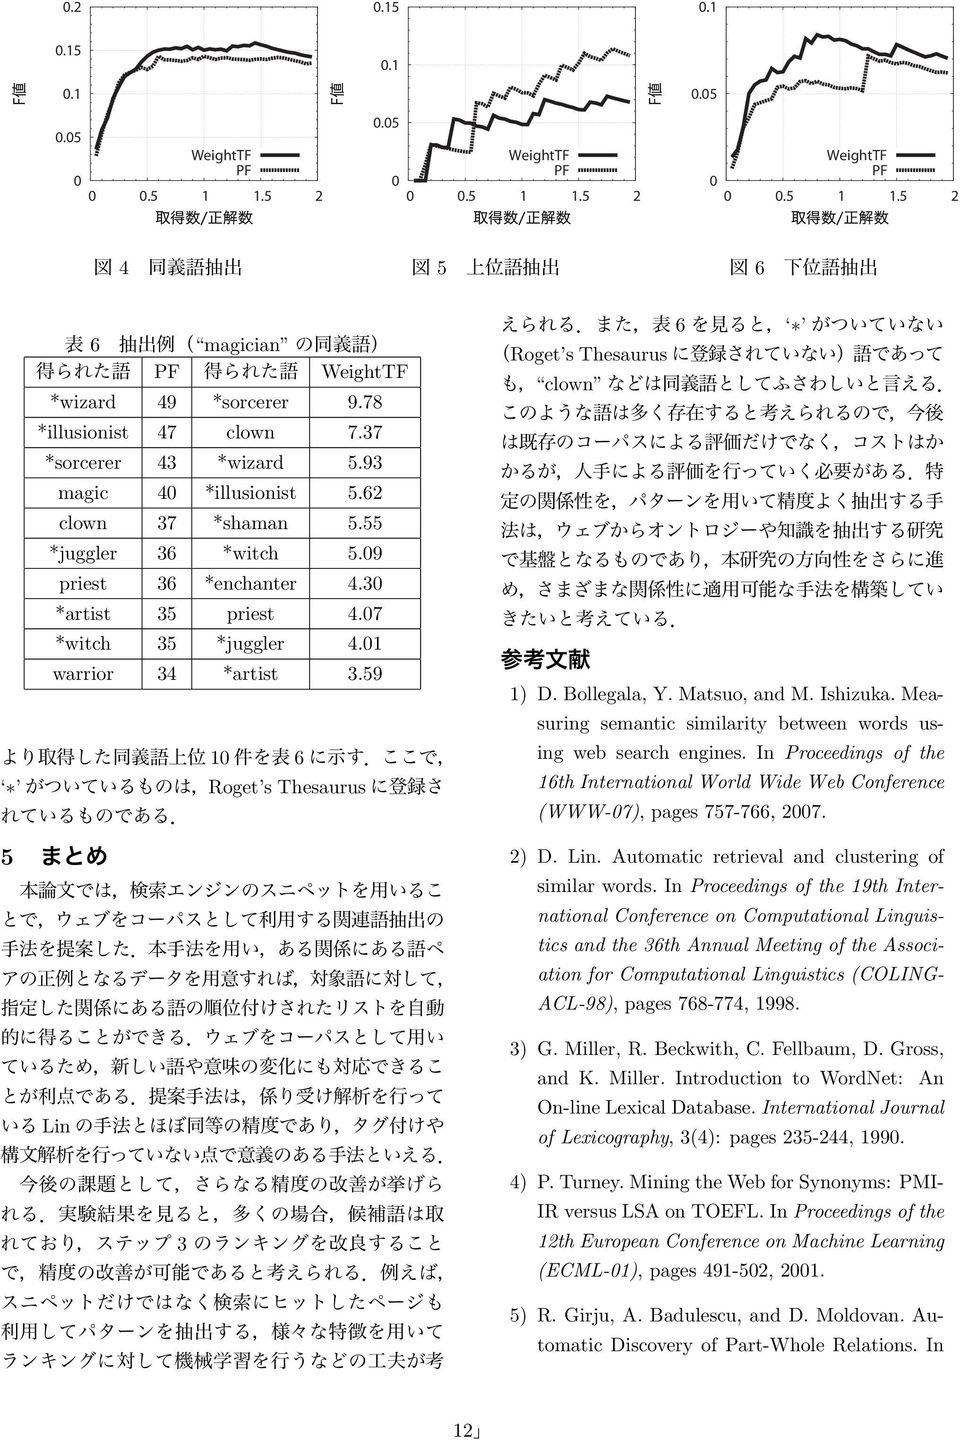 01 warrior 34 *artist 3.59 10 6 Roget s Thesaurus 5 Lin 3 6 Roget s Thesaurus clown 1) D. Bollegala, Y. Matsuo, and M. Ishizuka. Measuring semantic similarity between words using web search engines.